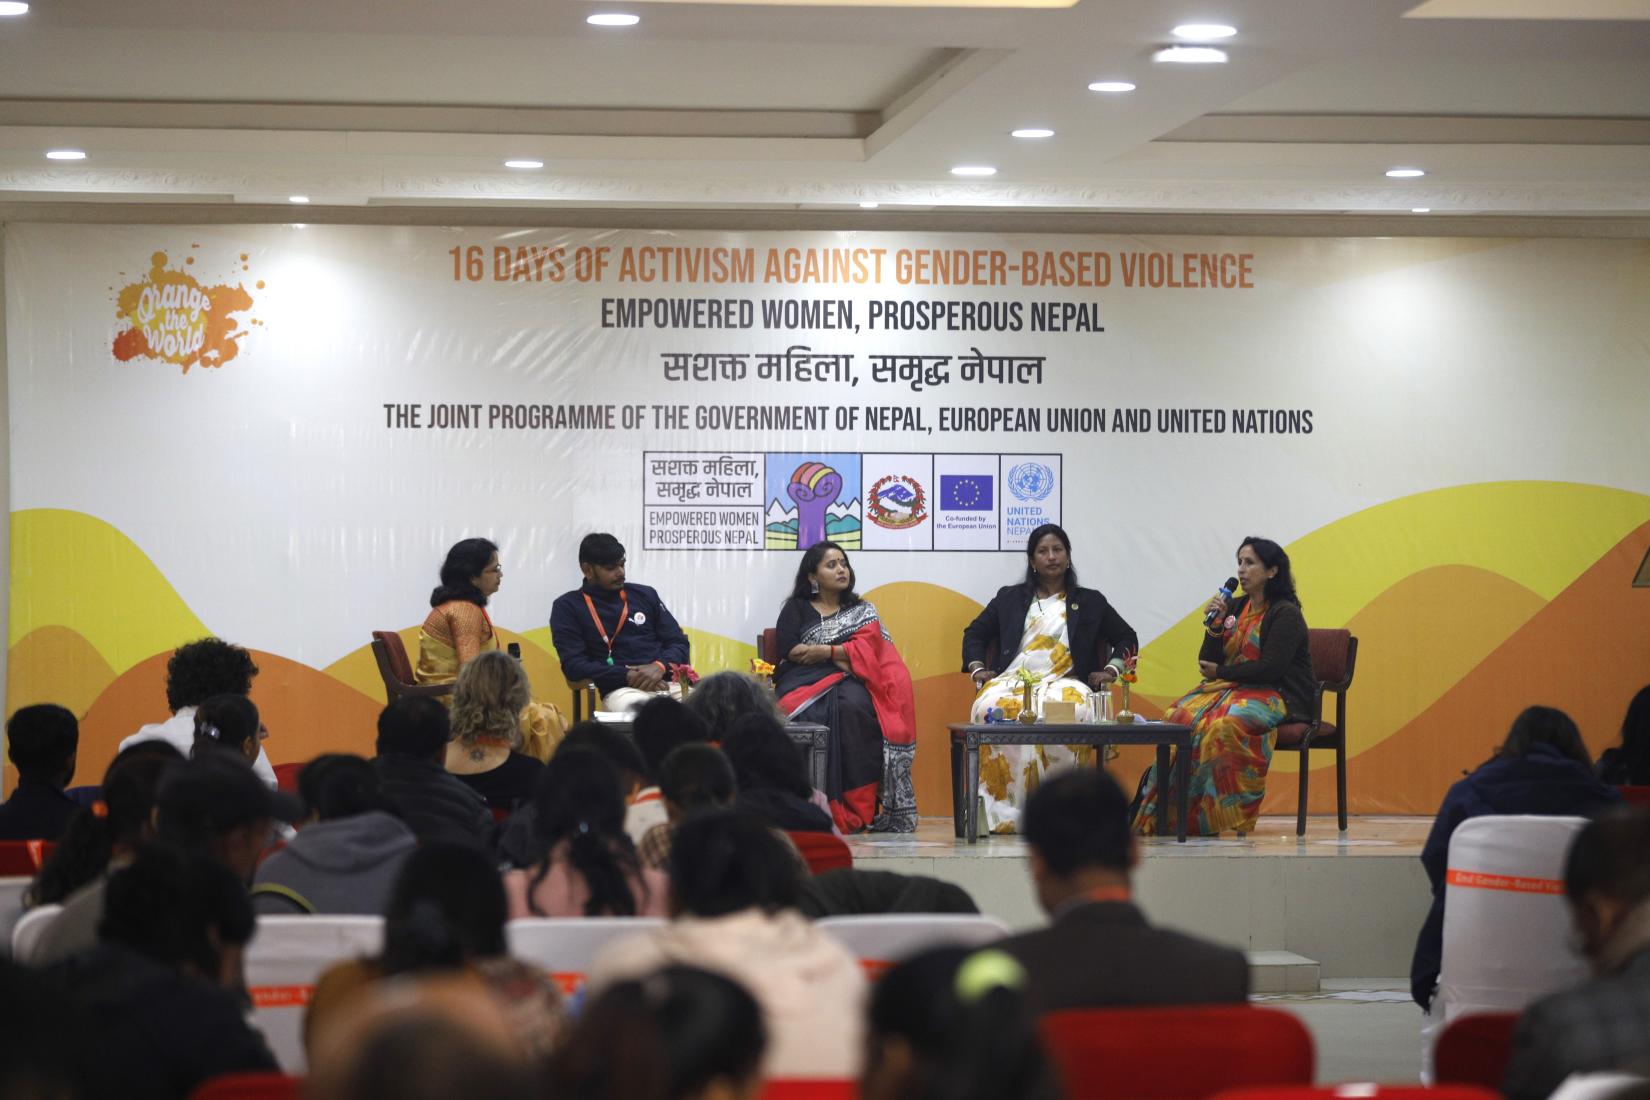 Four women and one man are seated on a platform, engaged in a policy dialogue focused on investing in the prevention of Gender-Based Violence. In the foreground, several individuals are seated, facing the stage, attentively listening to the discussion on this important topic.